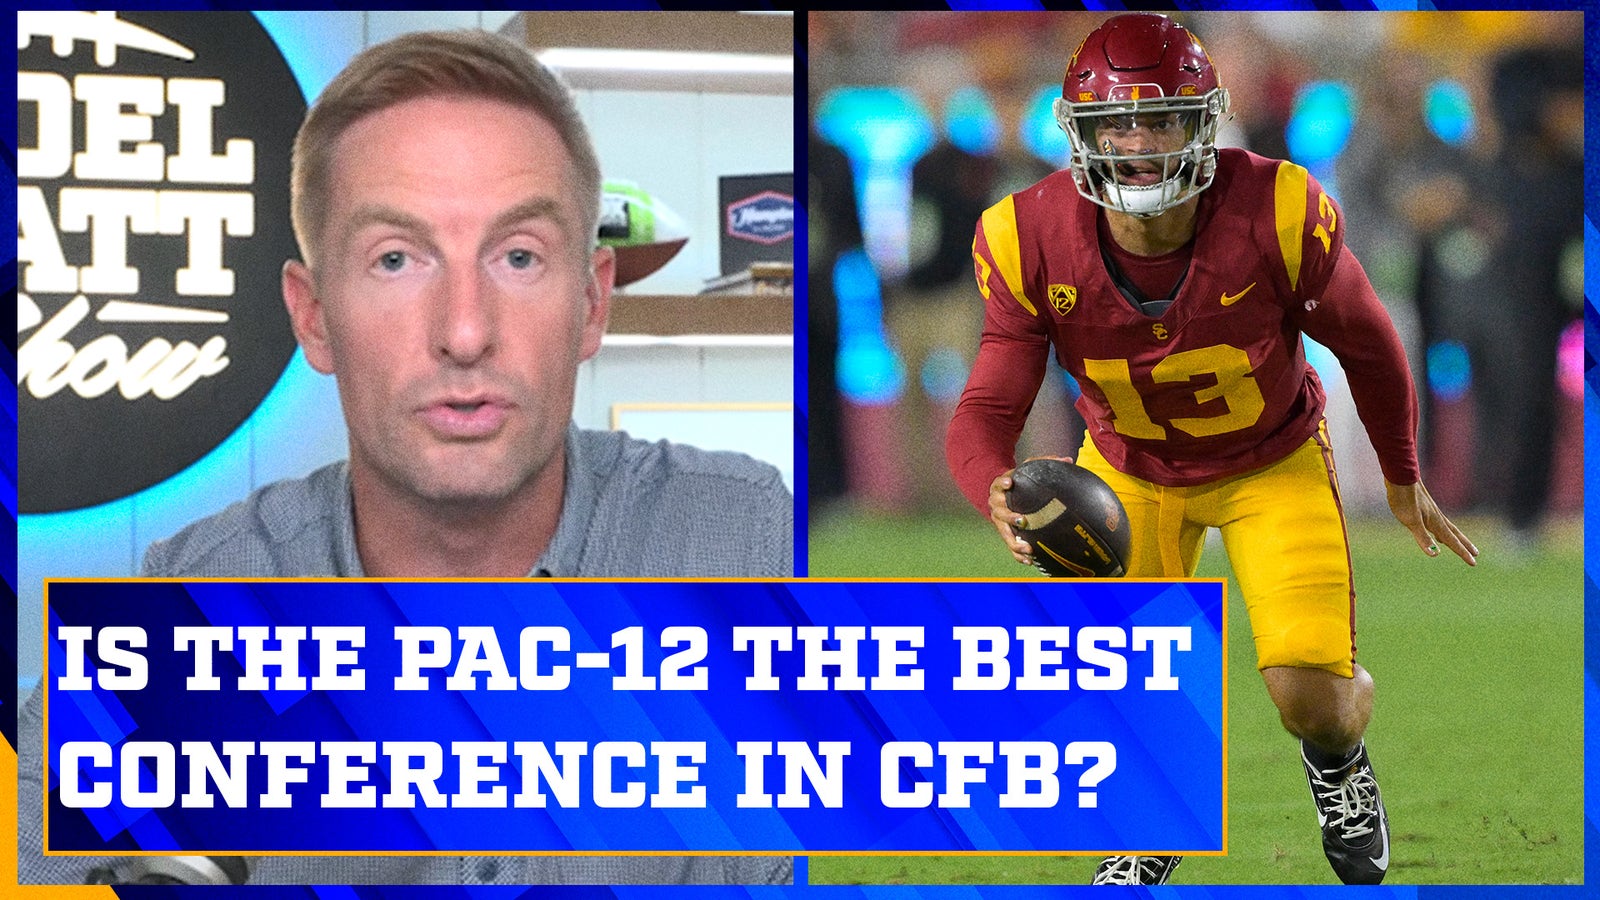 Has the Pac-12 taken over as the best conference in college football? 